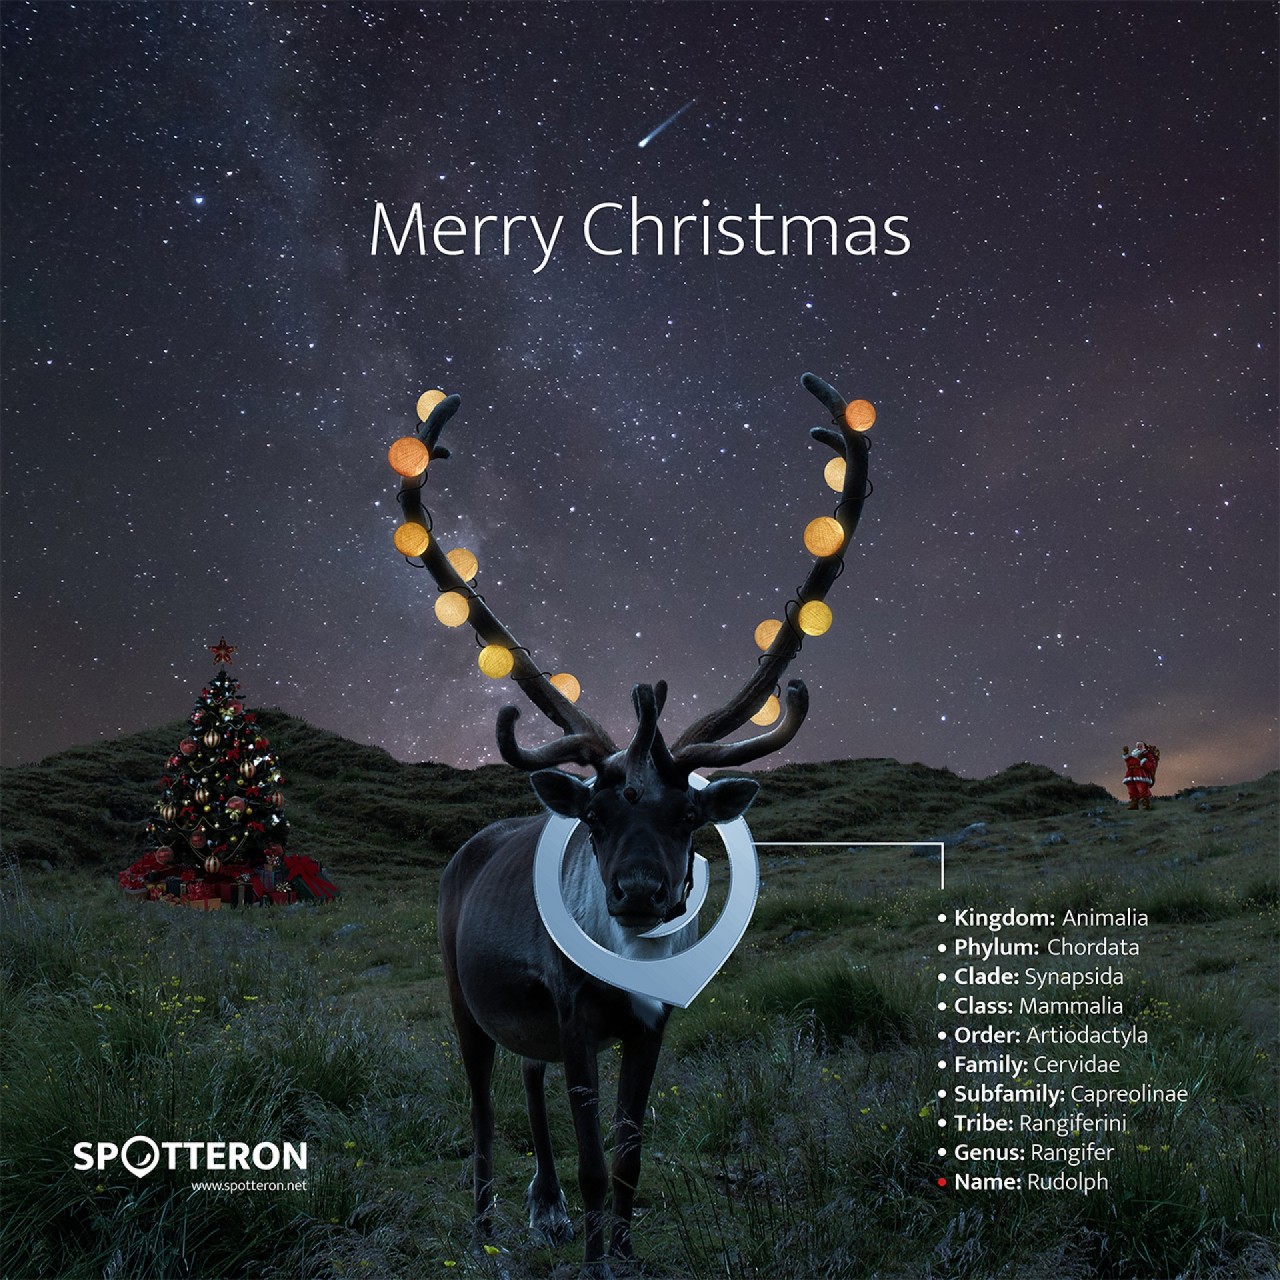 Merry Christmas, Citizen Science!